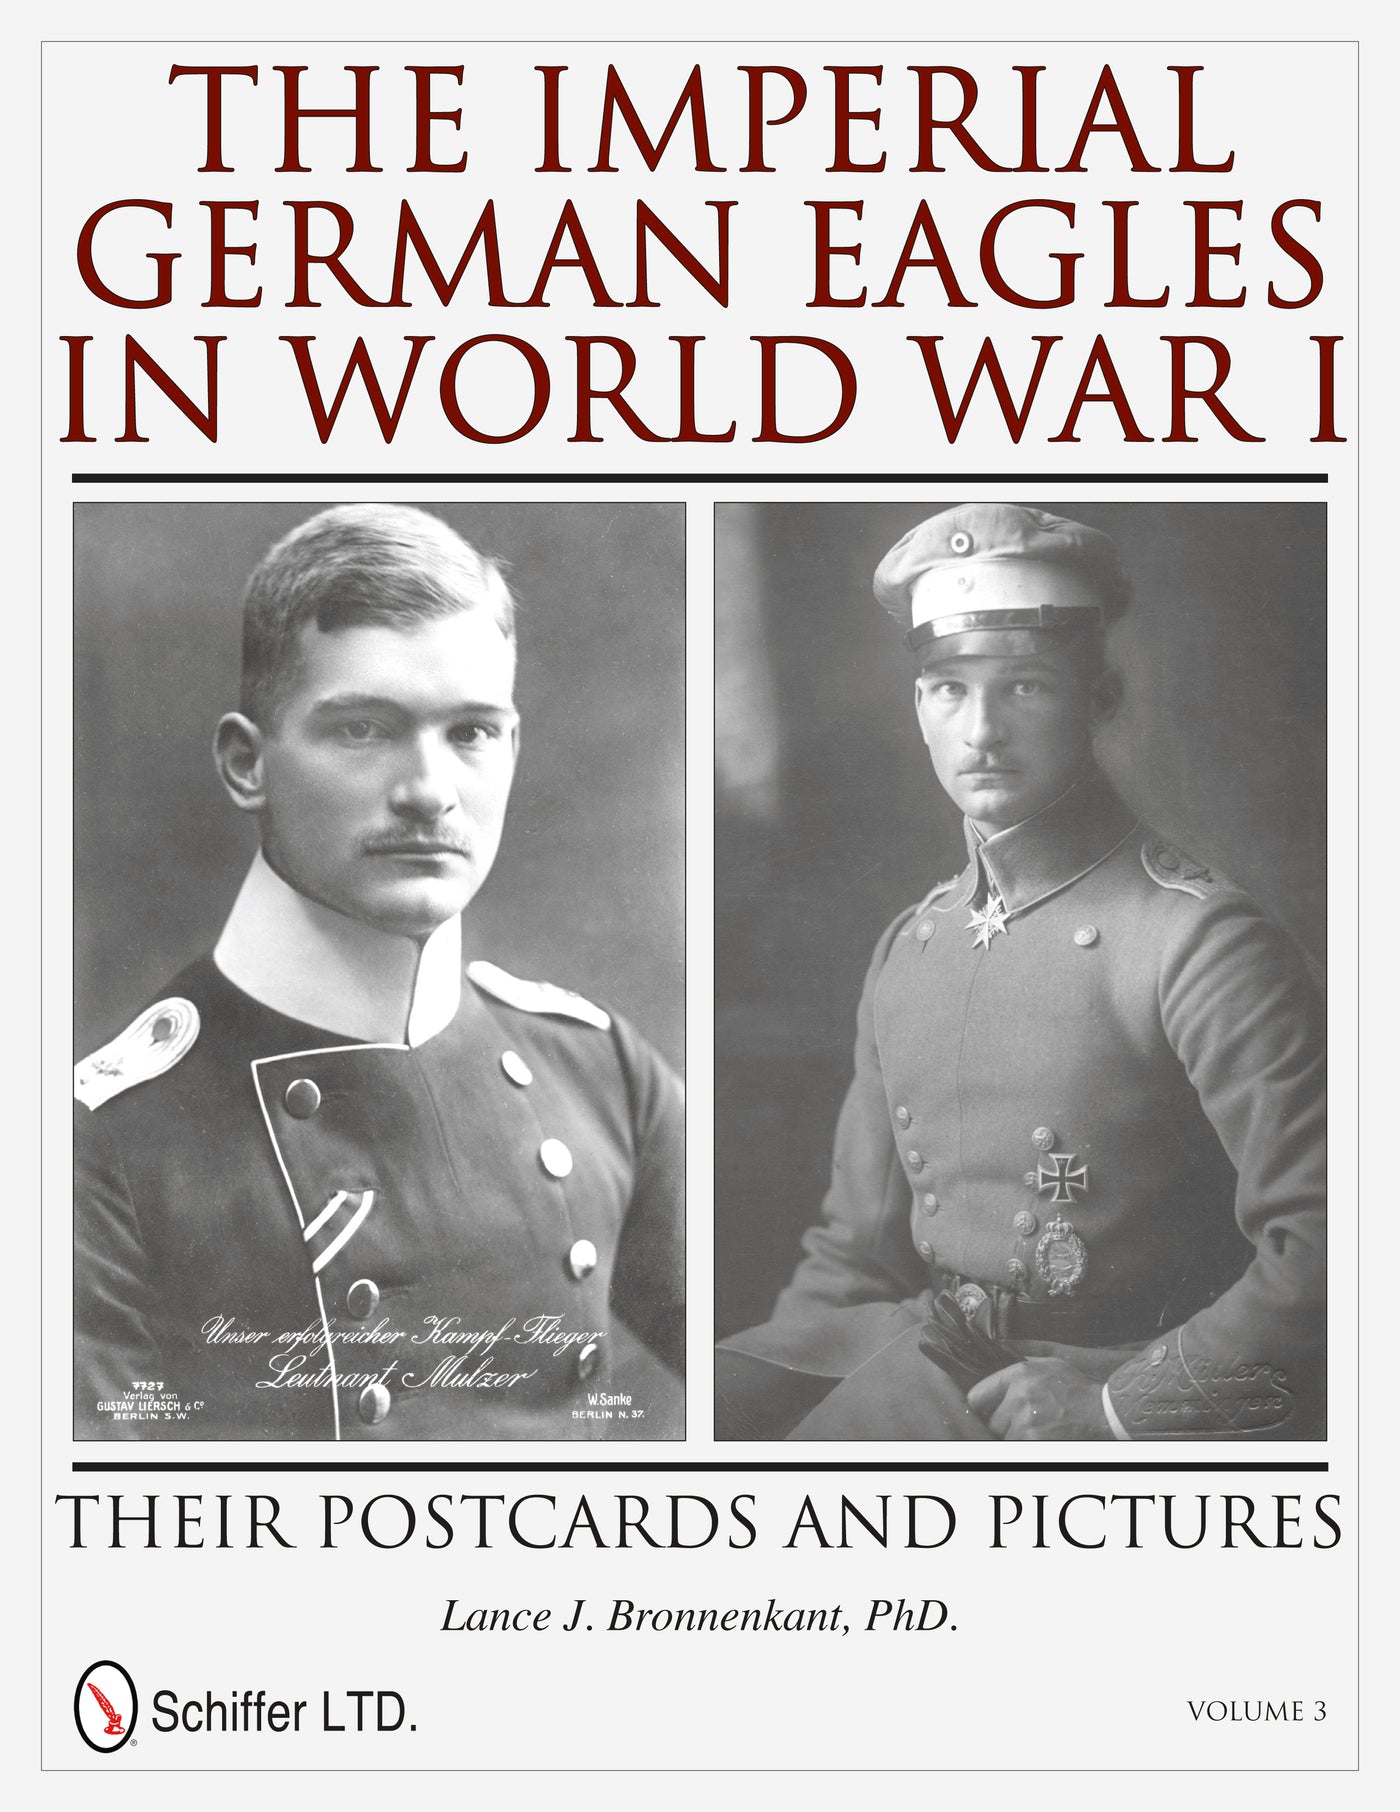 The Imperial German Eagles in World War I, Vol. 3